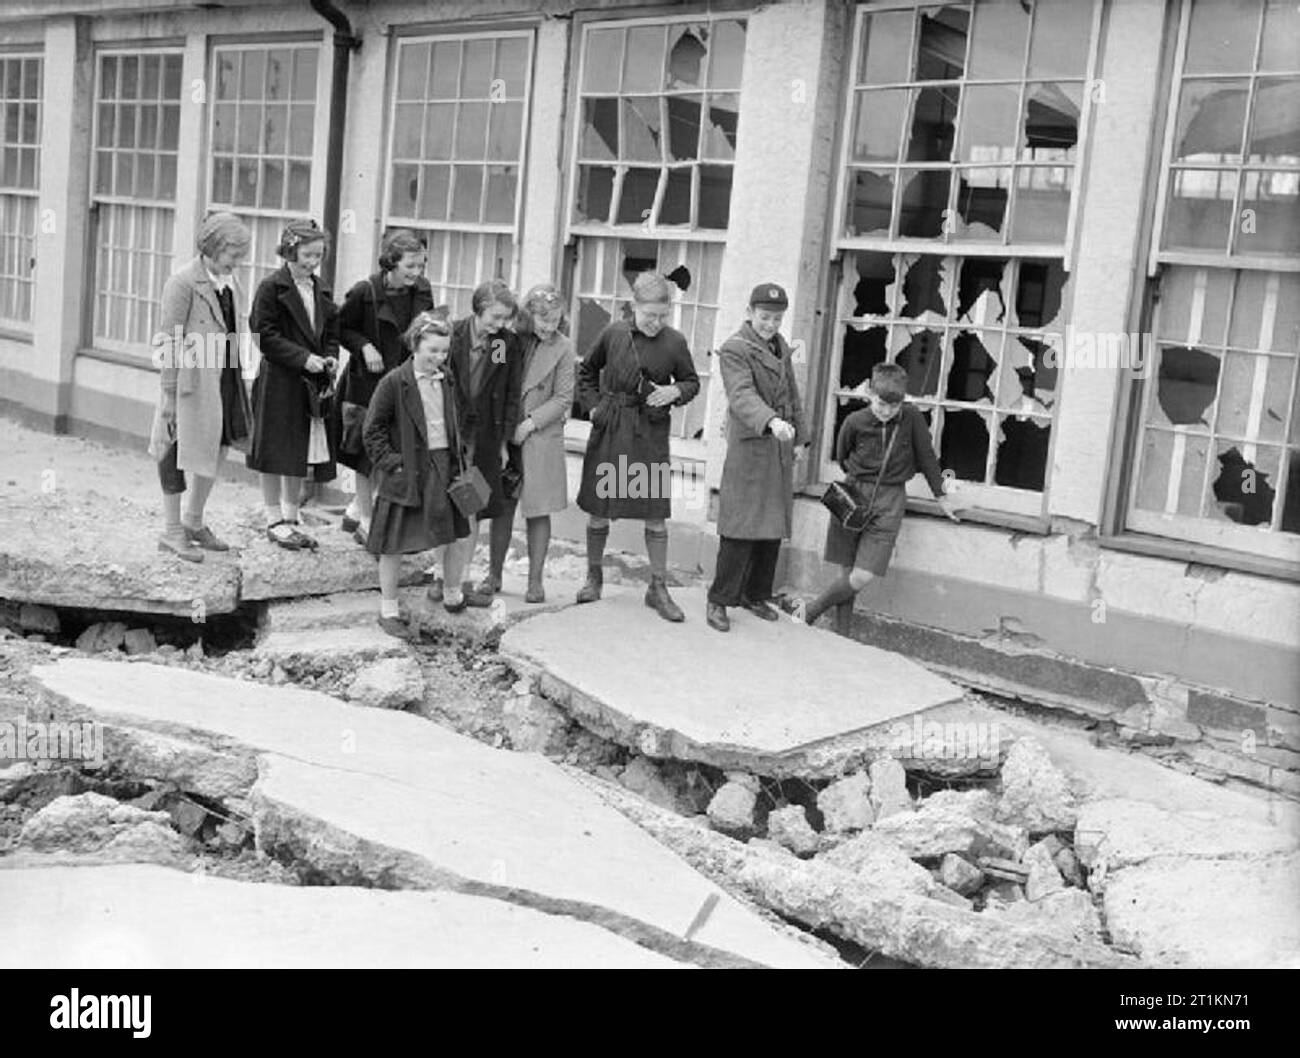 London Schools in Wartime- School Life in London, England, 1941 School children inspect bomb damage in the playground of Moorside Road School, Grove Park, London. One boy is pointing to a large hole in the concrete of the playground. Several of the windows have been smashed. All the boys are carrying their gas masks. Stock Photo